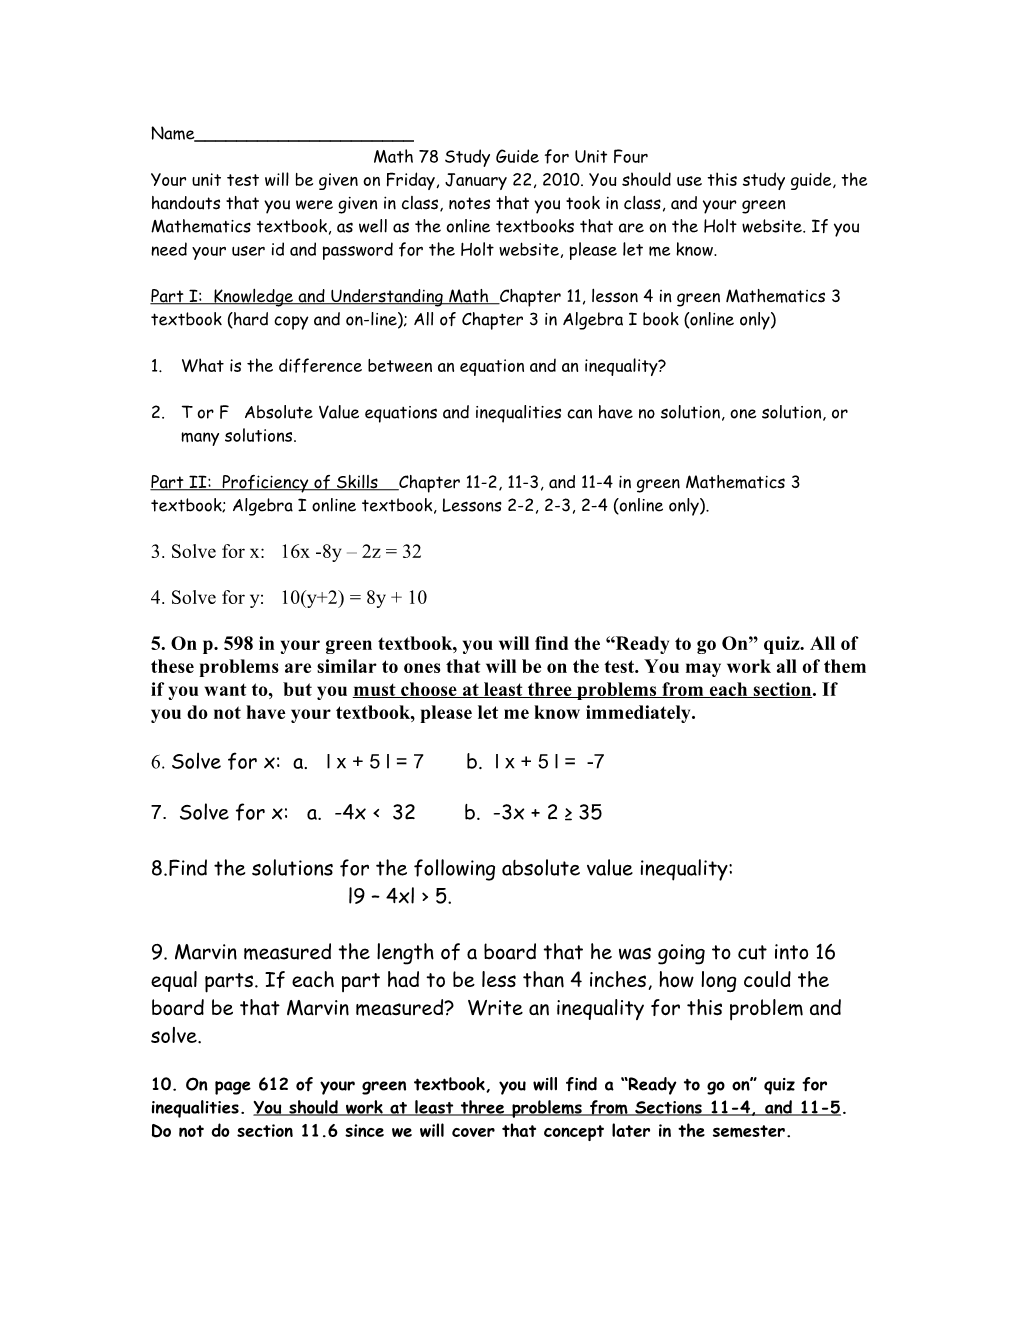 Math 78 Study Guide for Unit Four